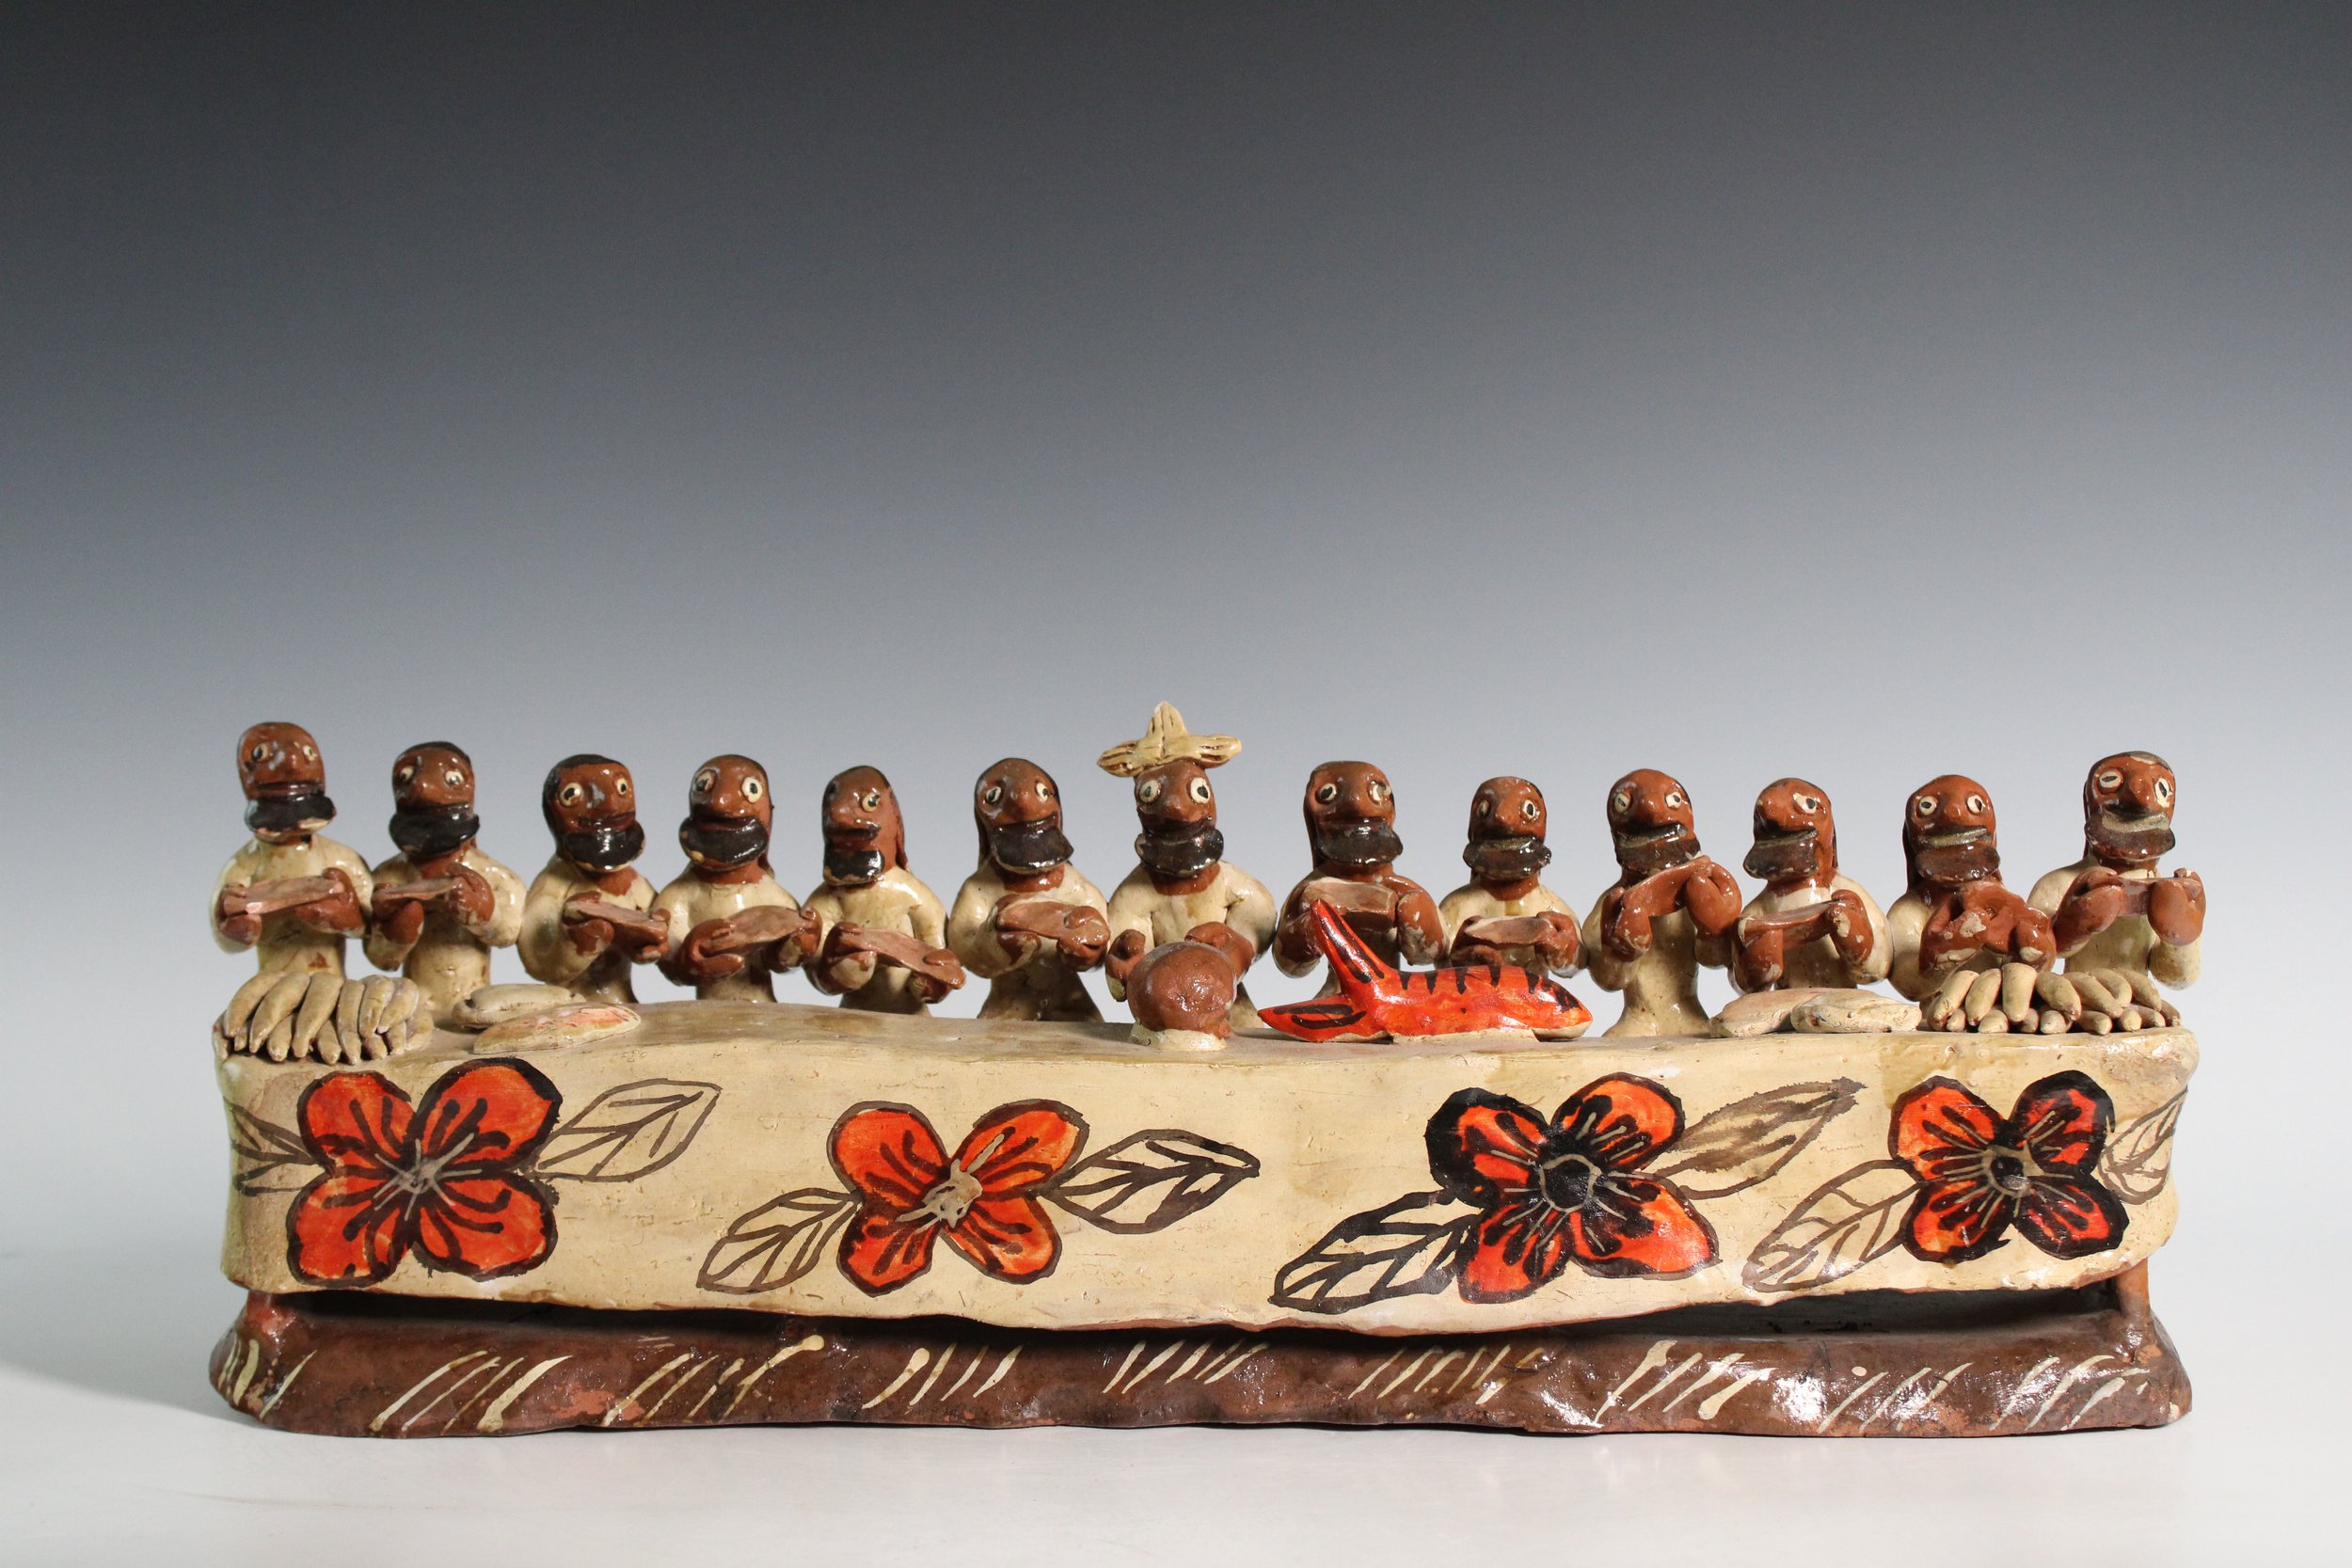 Mexican Folk Art Polychrome Earthenware Sculpture Depicting the Last Supper, Circa 1980